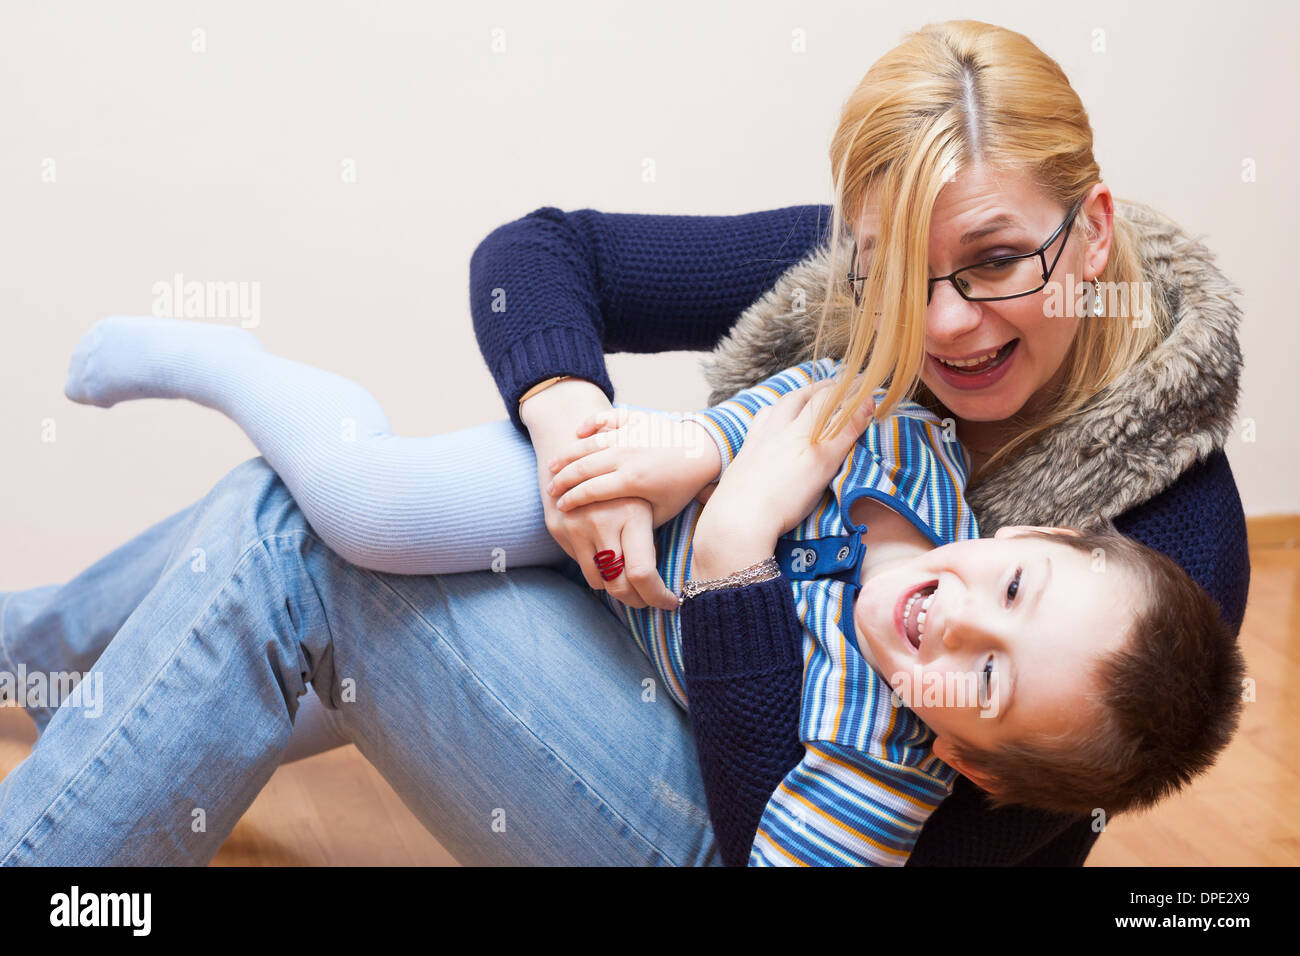 Happy child boy and woman having fun at home Stock Photo